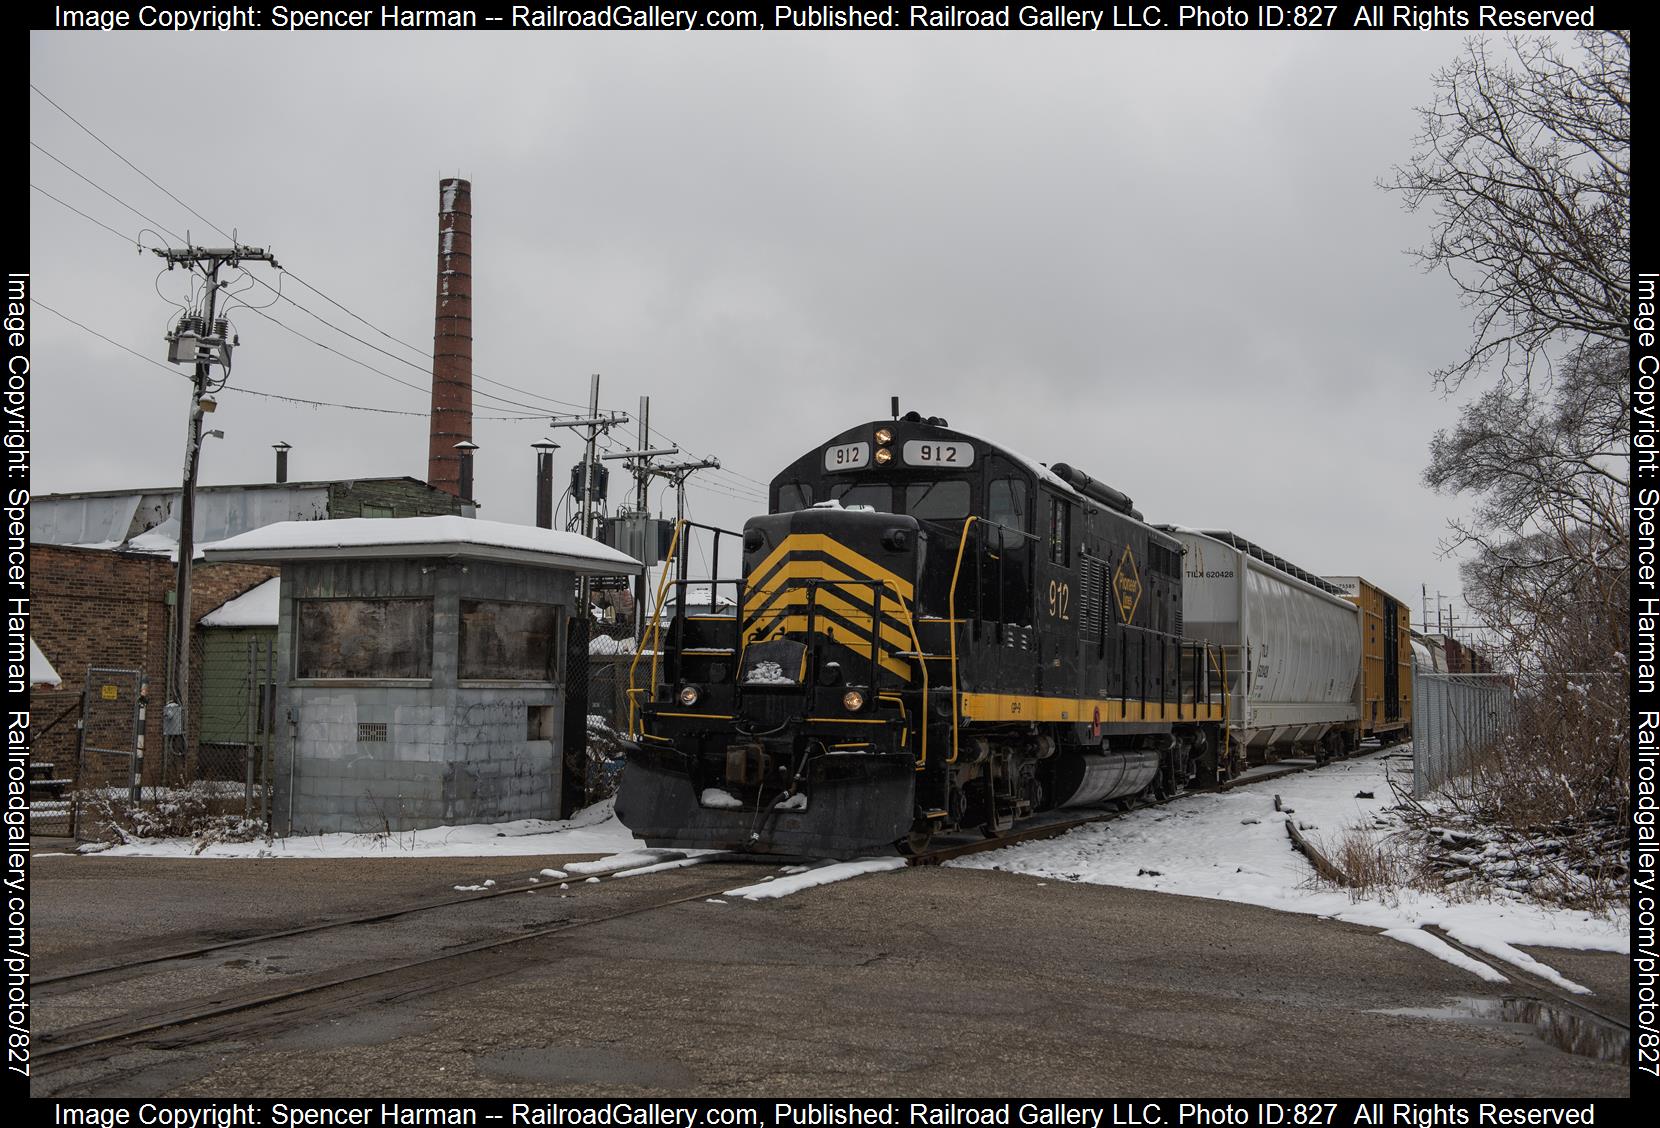 PREX 912 is a class EMD GP9 and  is pictured in Elkhart, Indiana, USA.  This was taken along the Main Line on the Elkhart and Western Railroad. Photo Copyright: Spencer Harman uploaded to Railroad Gallery on 03/10/2023. This photograph of PREX 912 was taken on Friday, March 10, 2023. All Rights Reserved. 